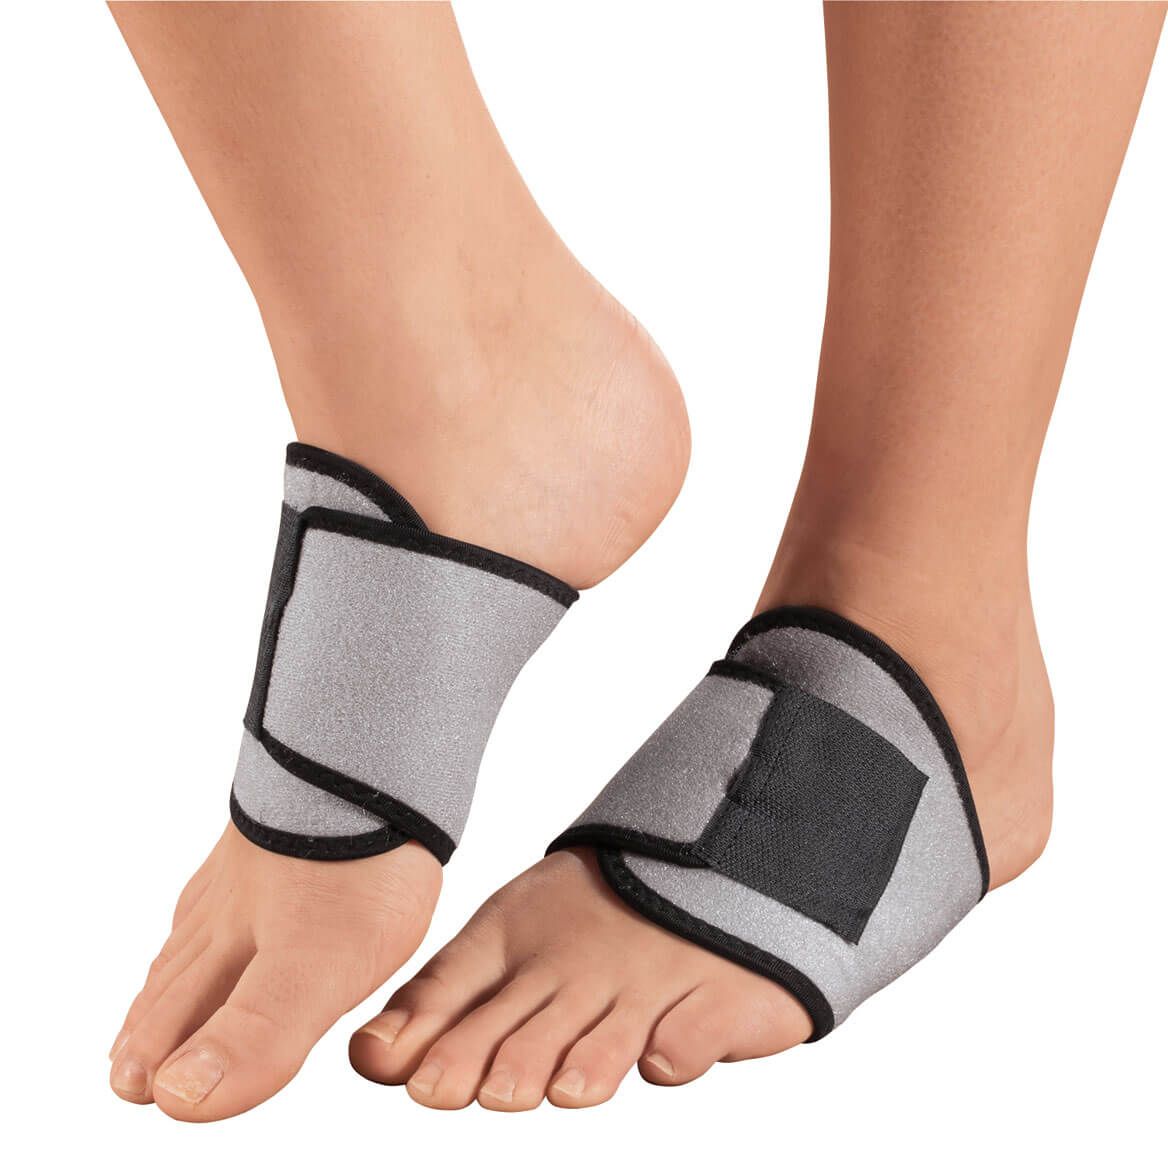 Adjustable Compression Arch Support, 1 Pair + '-' + 359503